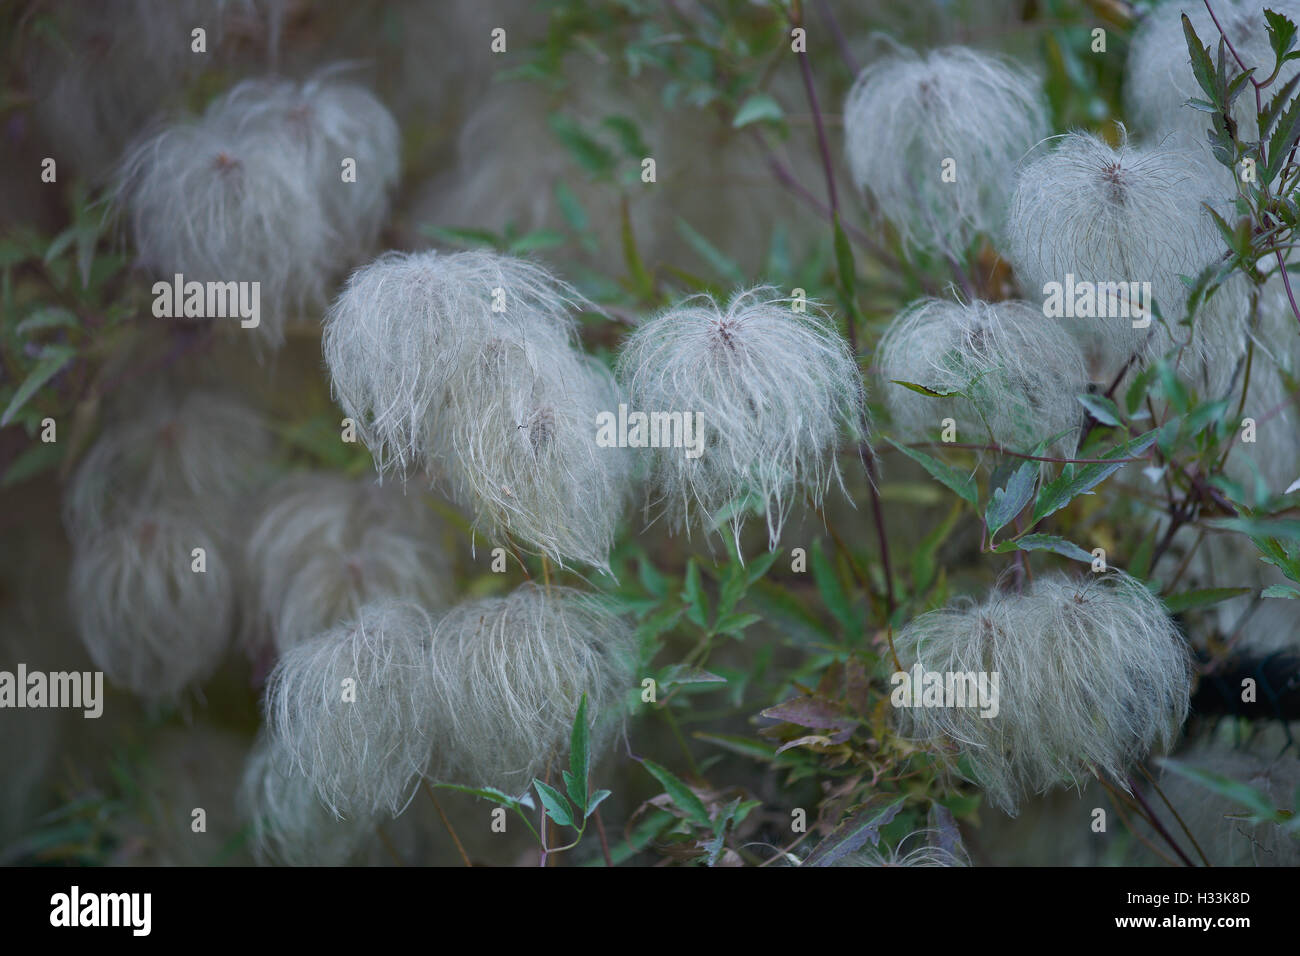 Fluffy clematis seed heads Stock Photo